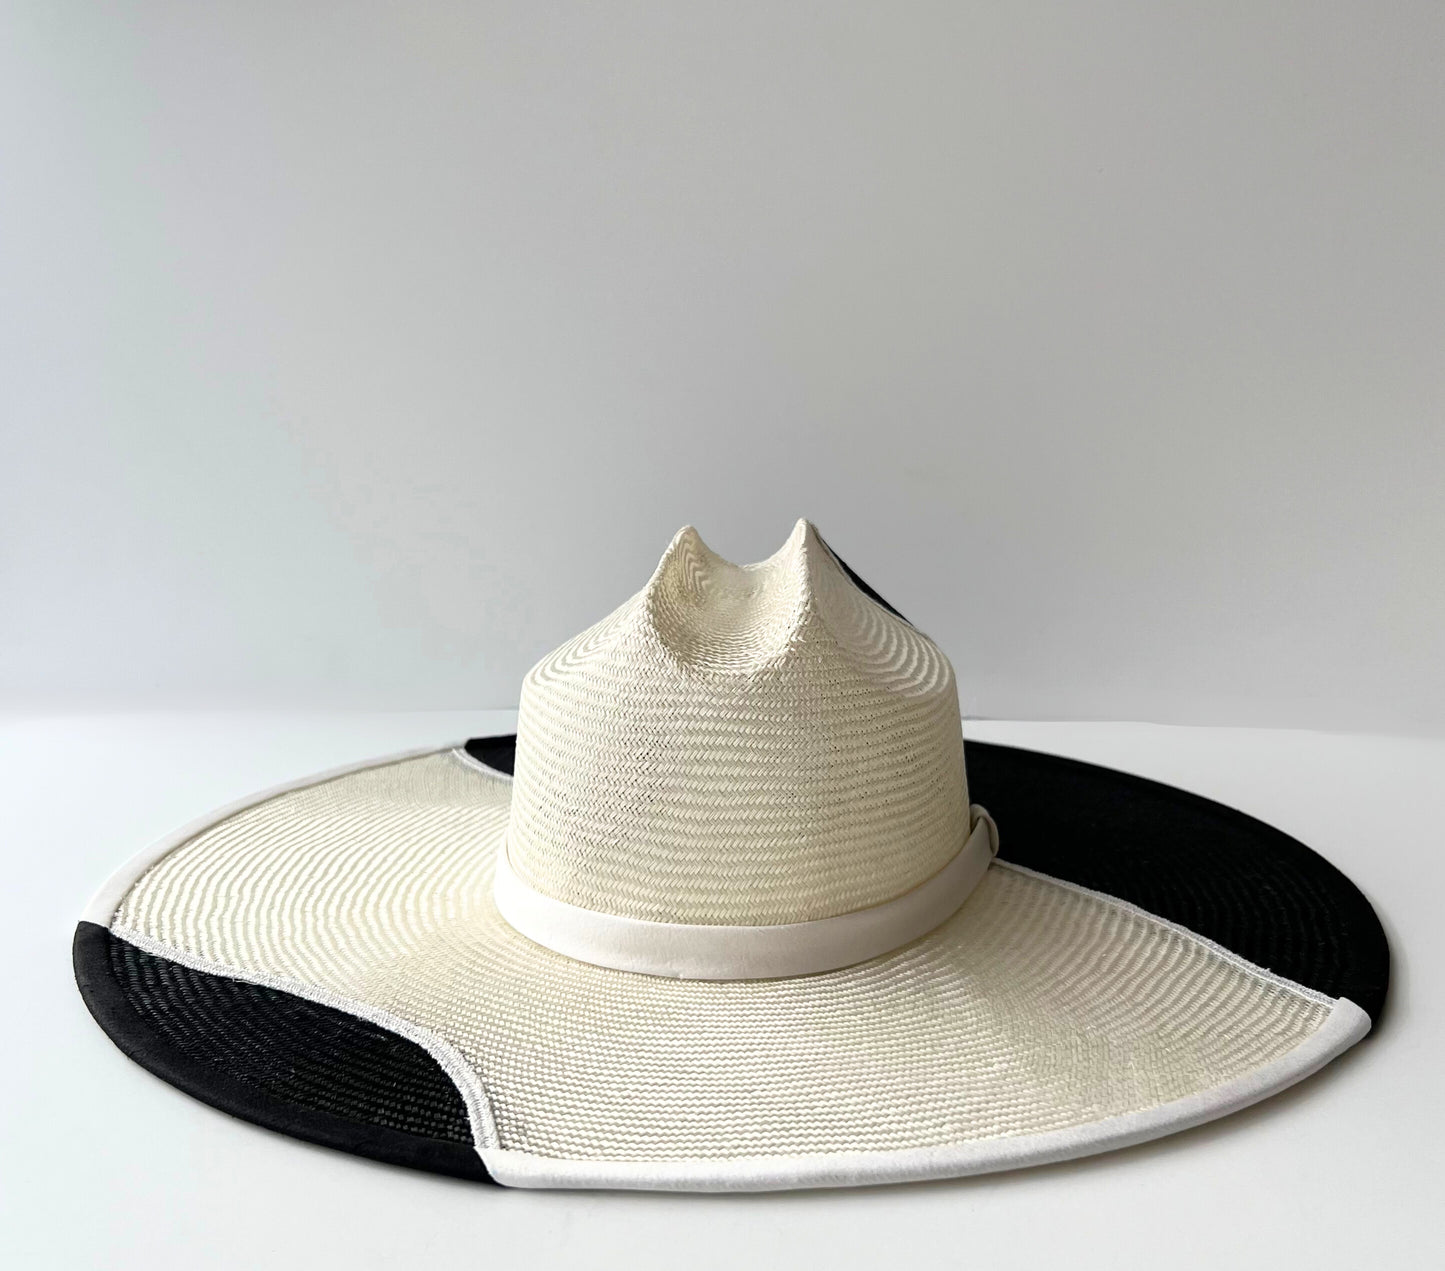 Clarke Duo Hat: Black and White